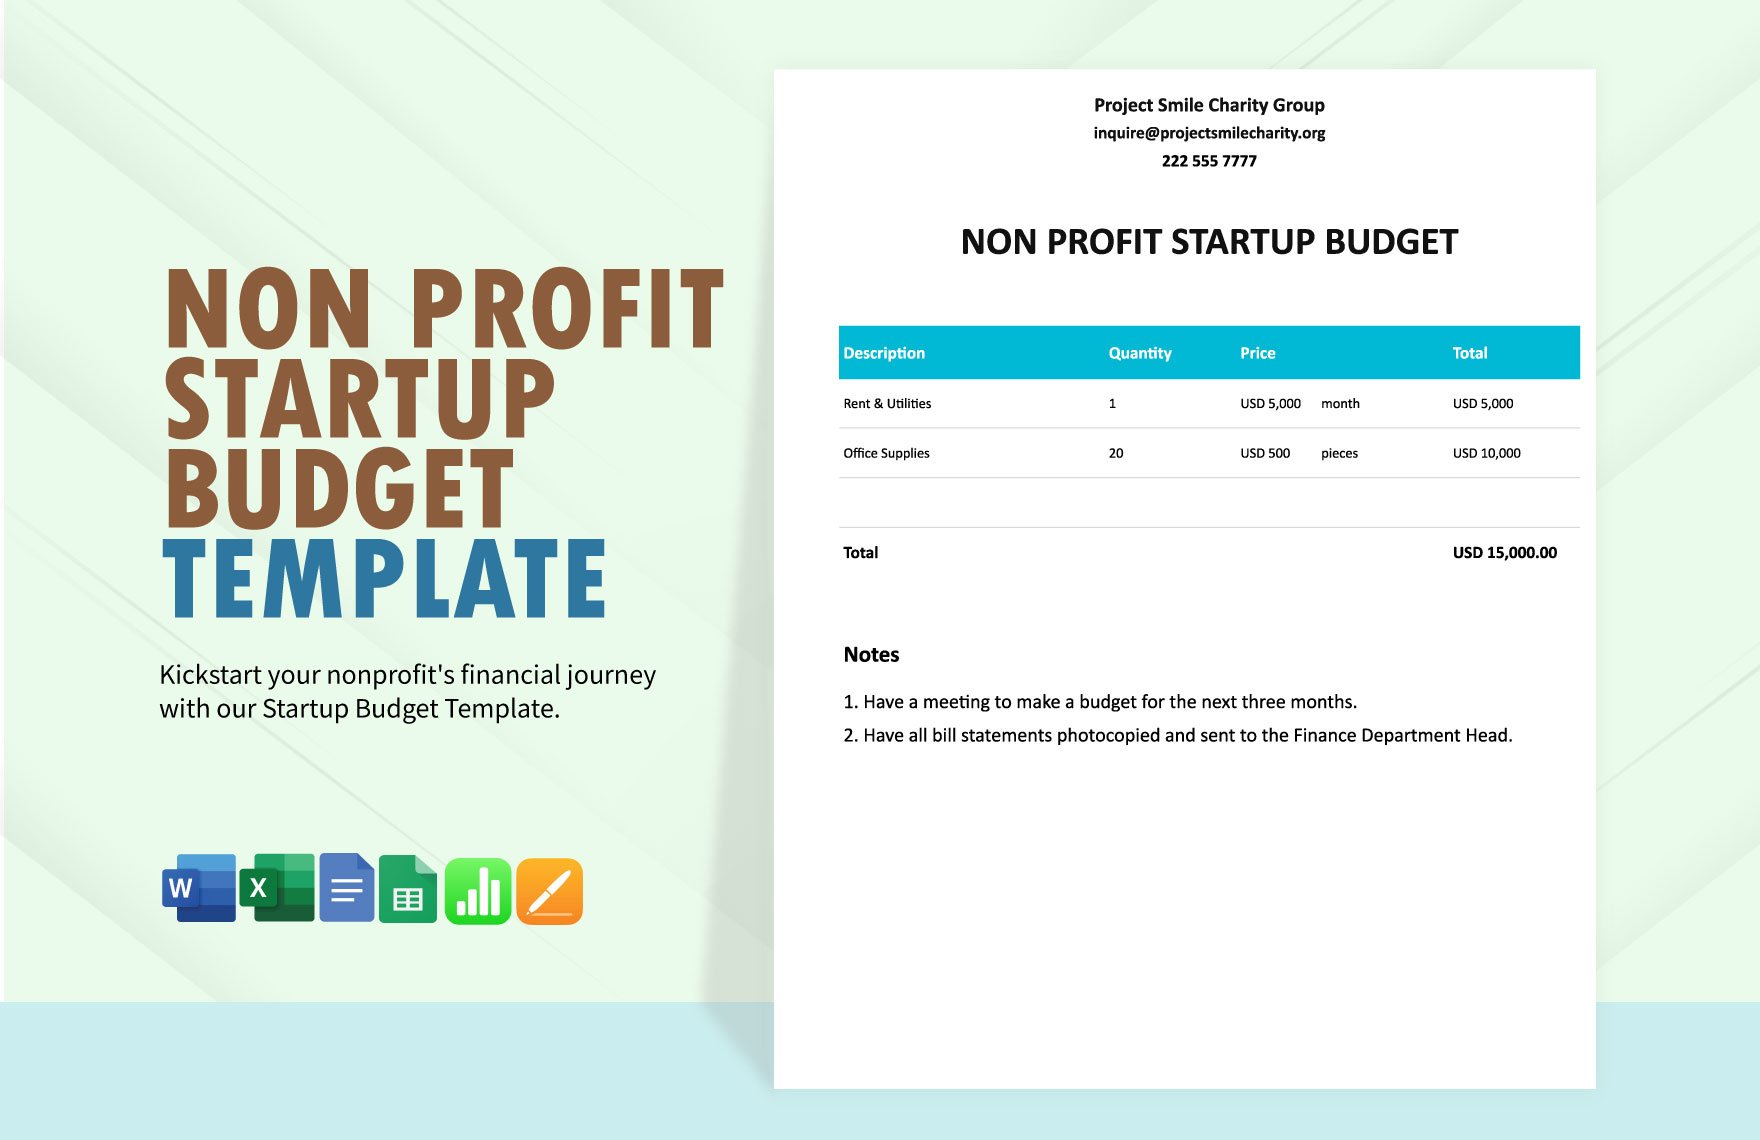 Non Profit Startup Budget Template in Word, Google Docs, Excel, Google Sheets, Apple Pages, Apple Numbers